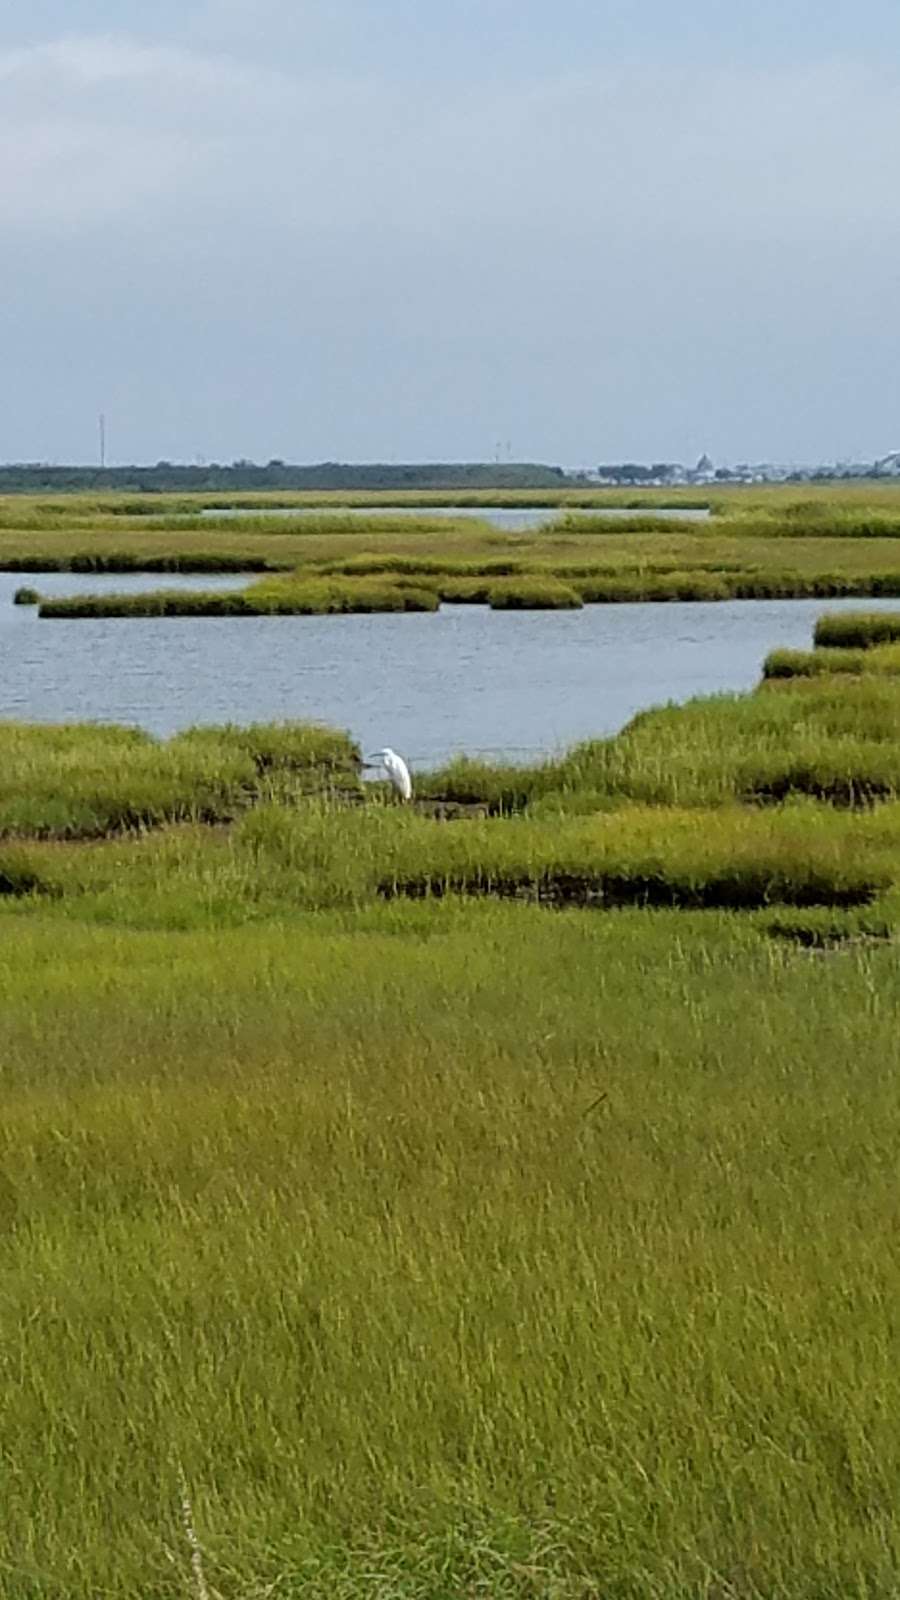 Birding By Boat on the Osprey | 1212 Wilson Dr, Cape May, NJ 08204 | Phone: (609) 898-3500